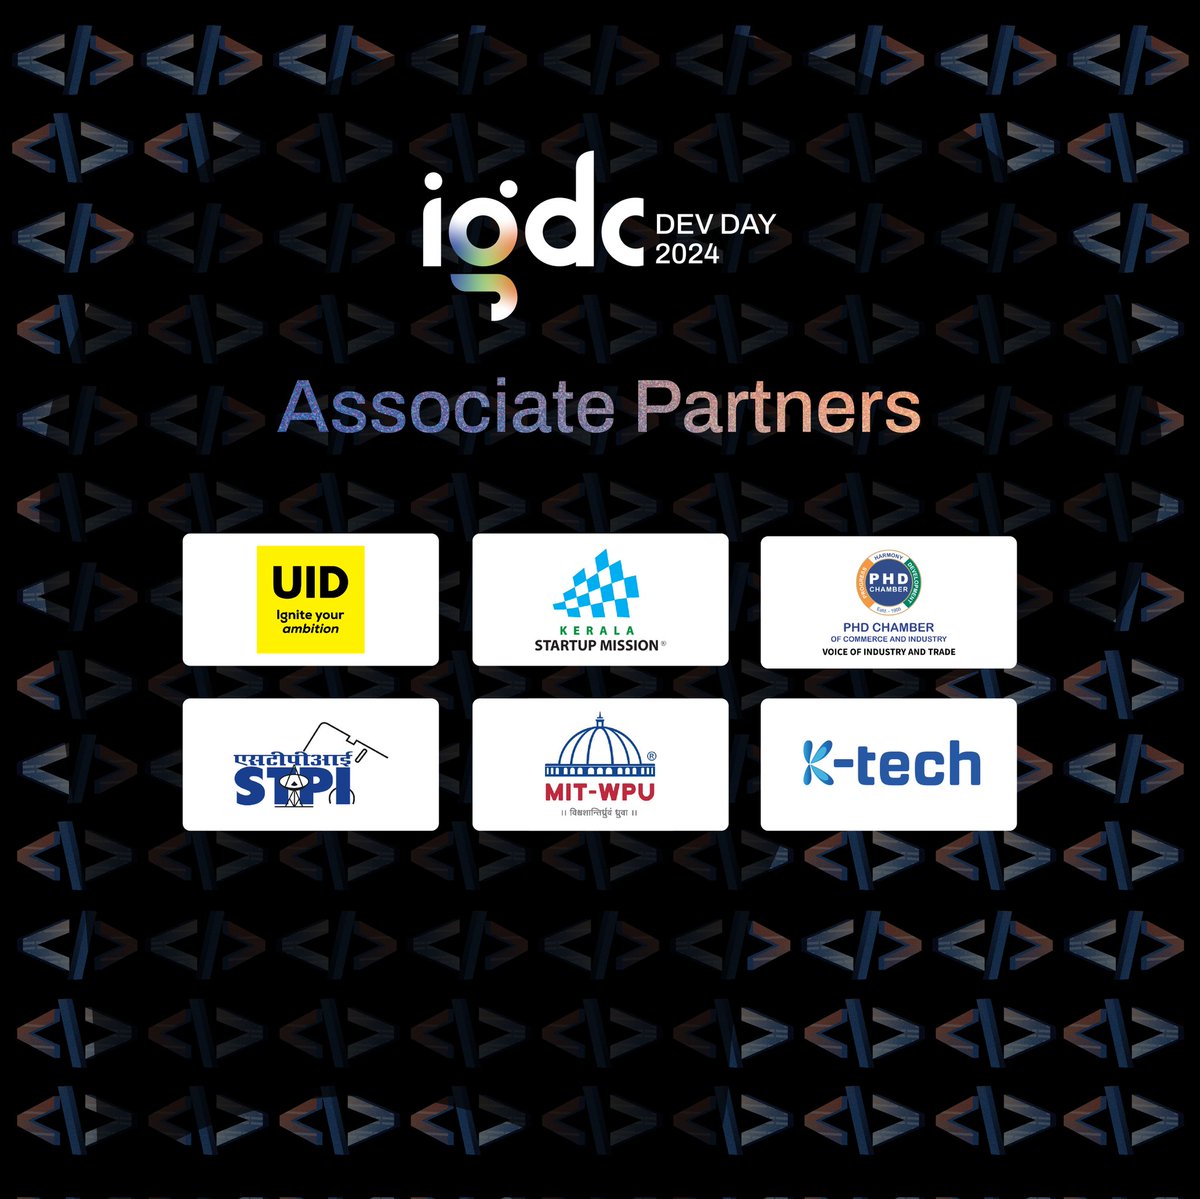 Meet our Associate Sponsors for the the upcoming developer days!

Get your tickets before they sell out 👋
indiagdc.com
#igdcdevday #igdc #gamedev